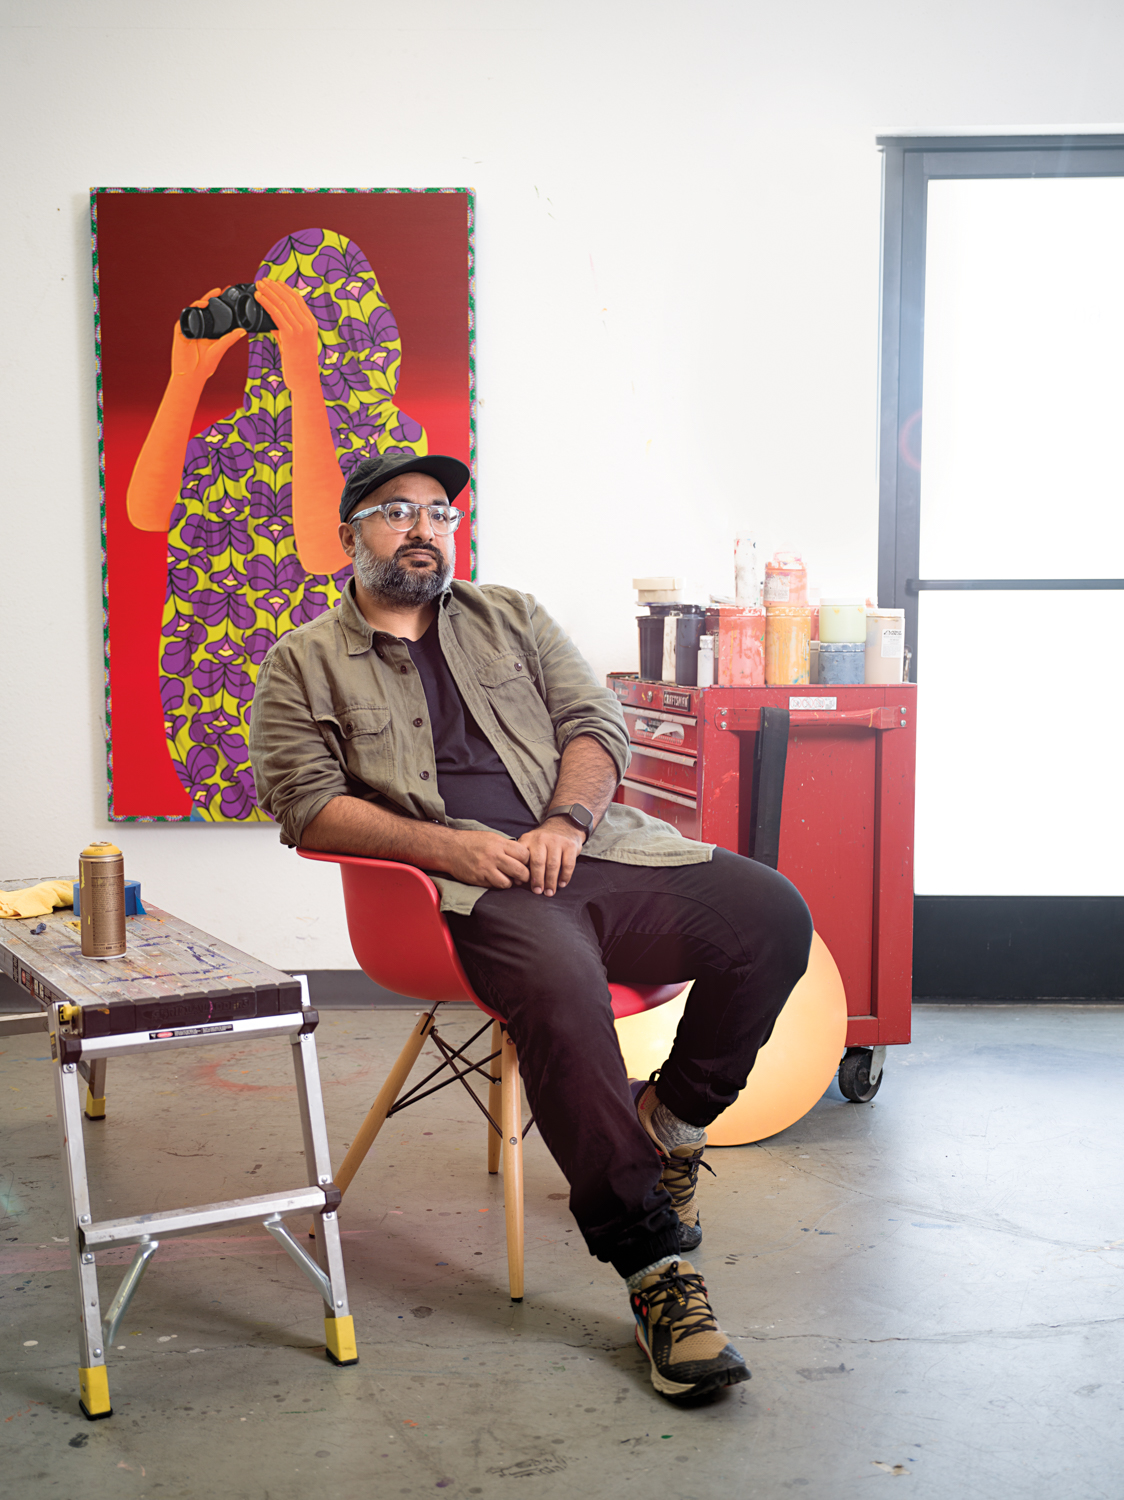 Amir H. Fallah wearing a baseball cap and glasses seated in front of painting